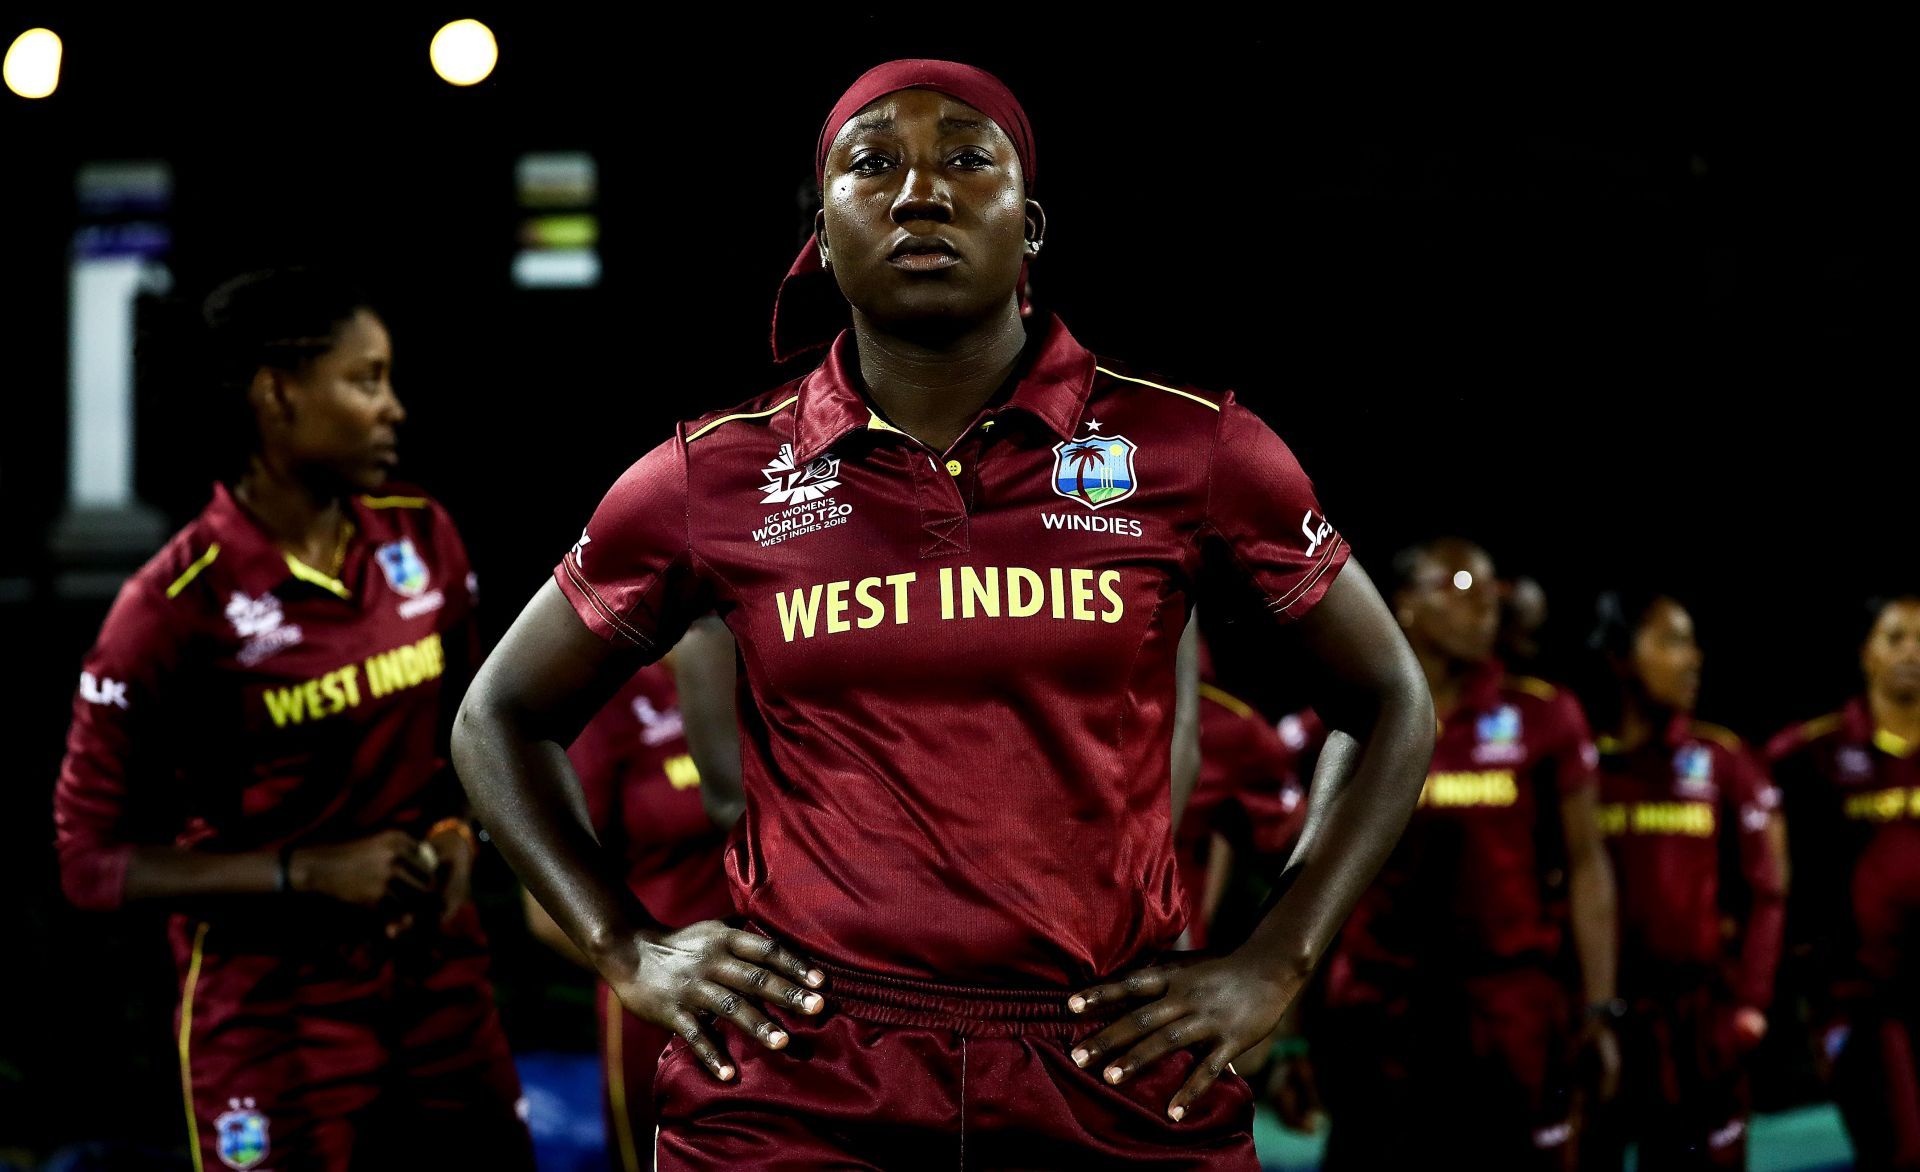 Stafanie Taylor has been included in the West Indies Women squad (Image Courtesy: ICC Cricket)